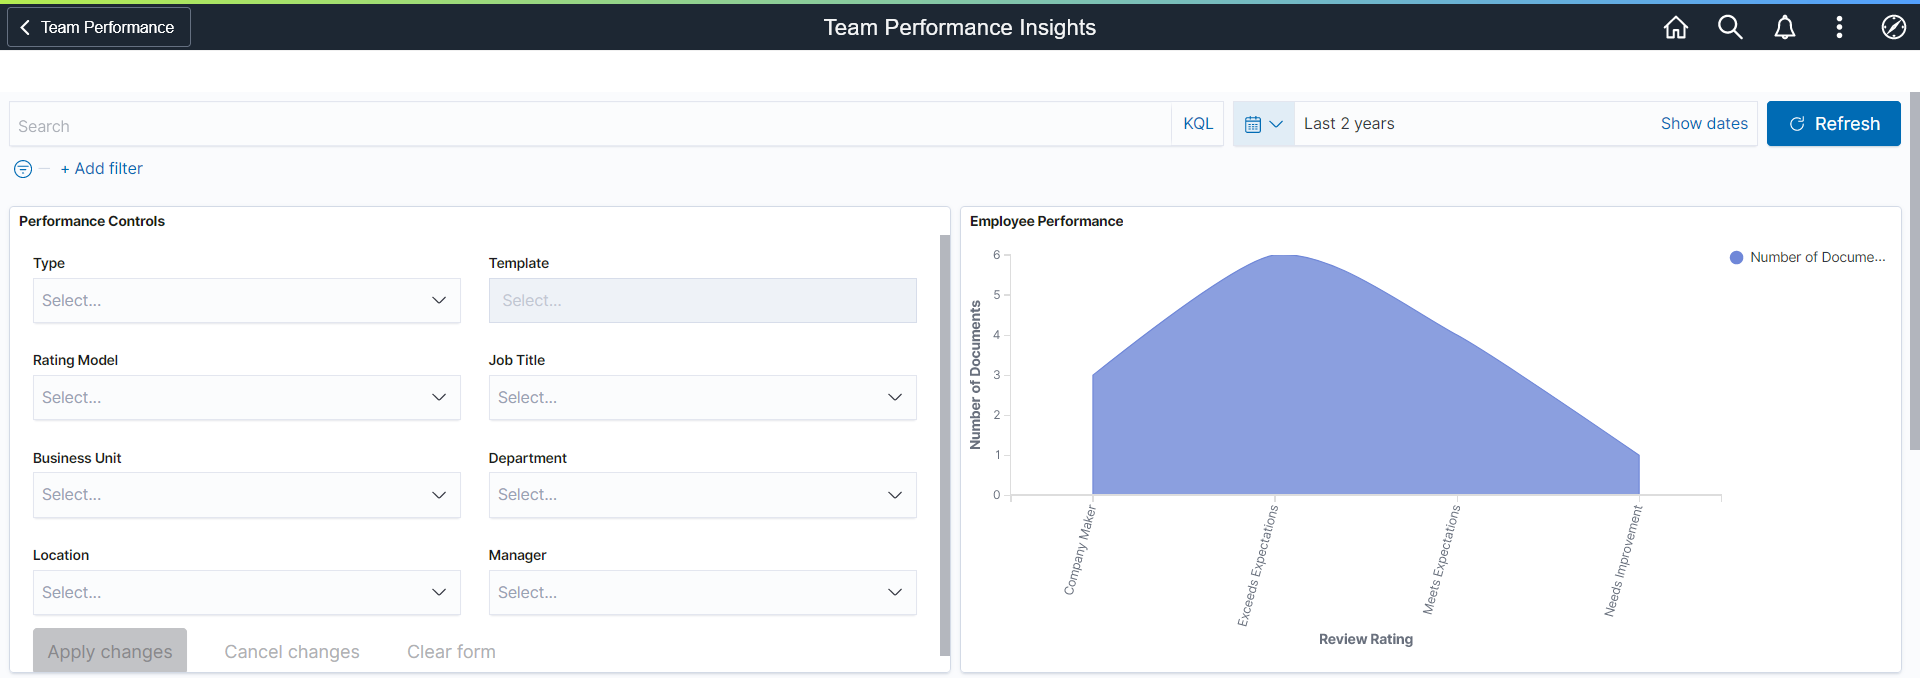 Team Performance Insights dashboard (1 of 3)